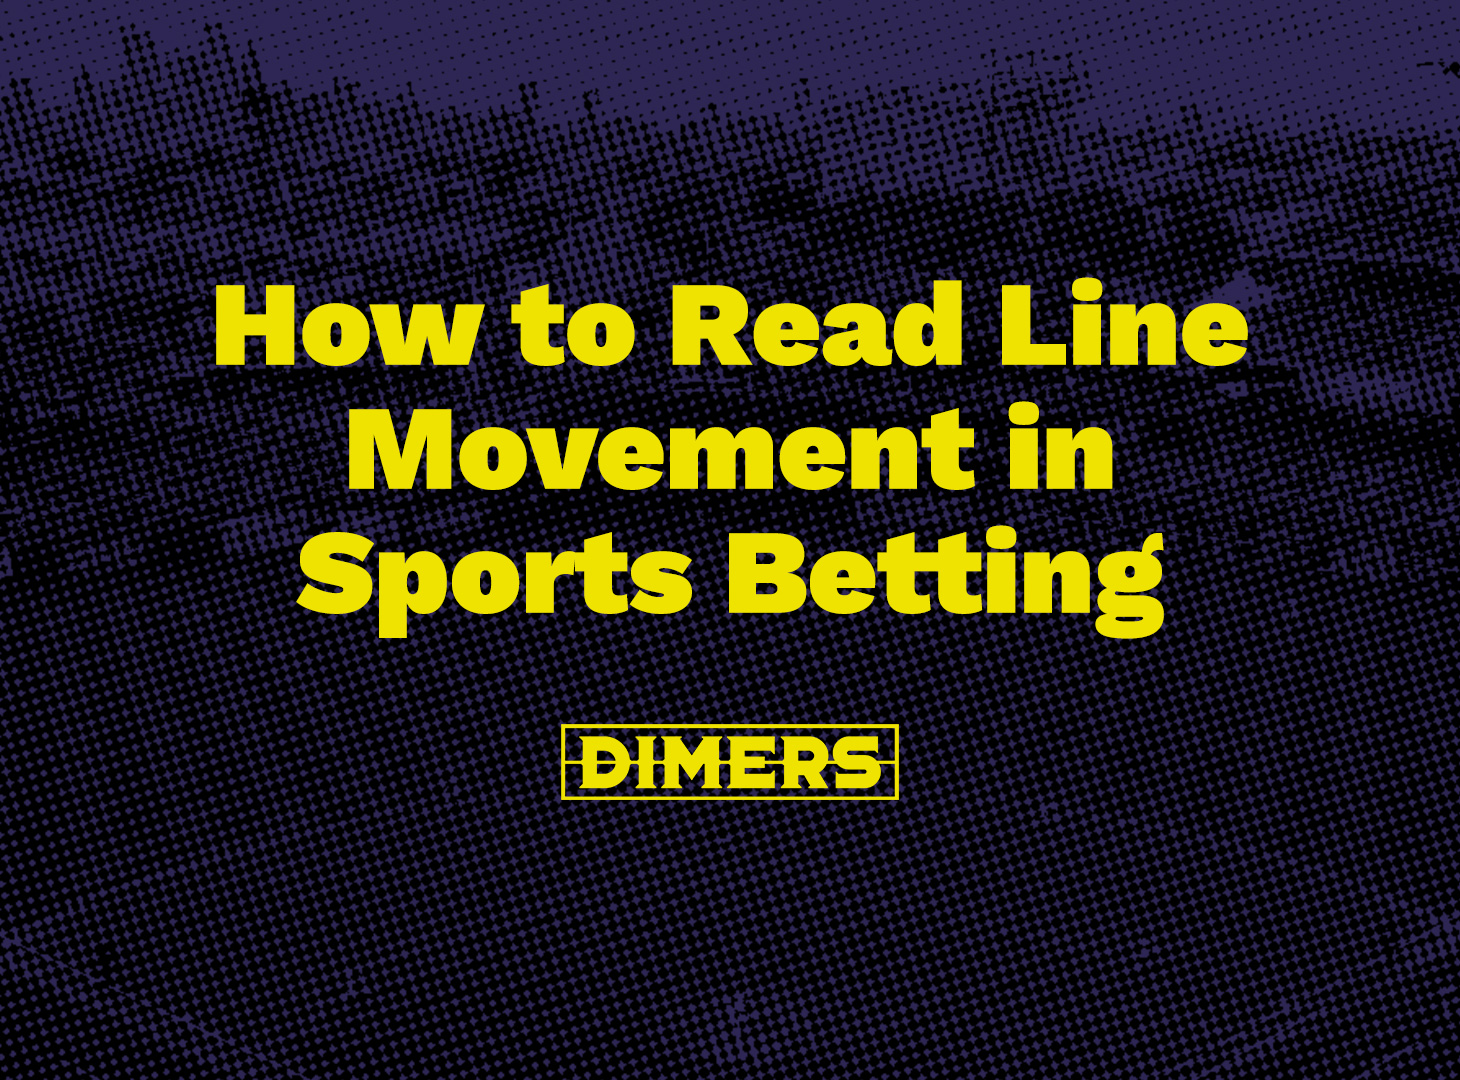 Photo: line movements in sports betting